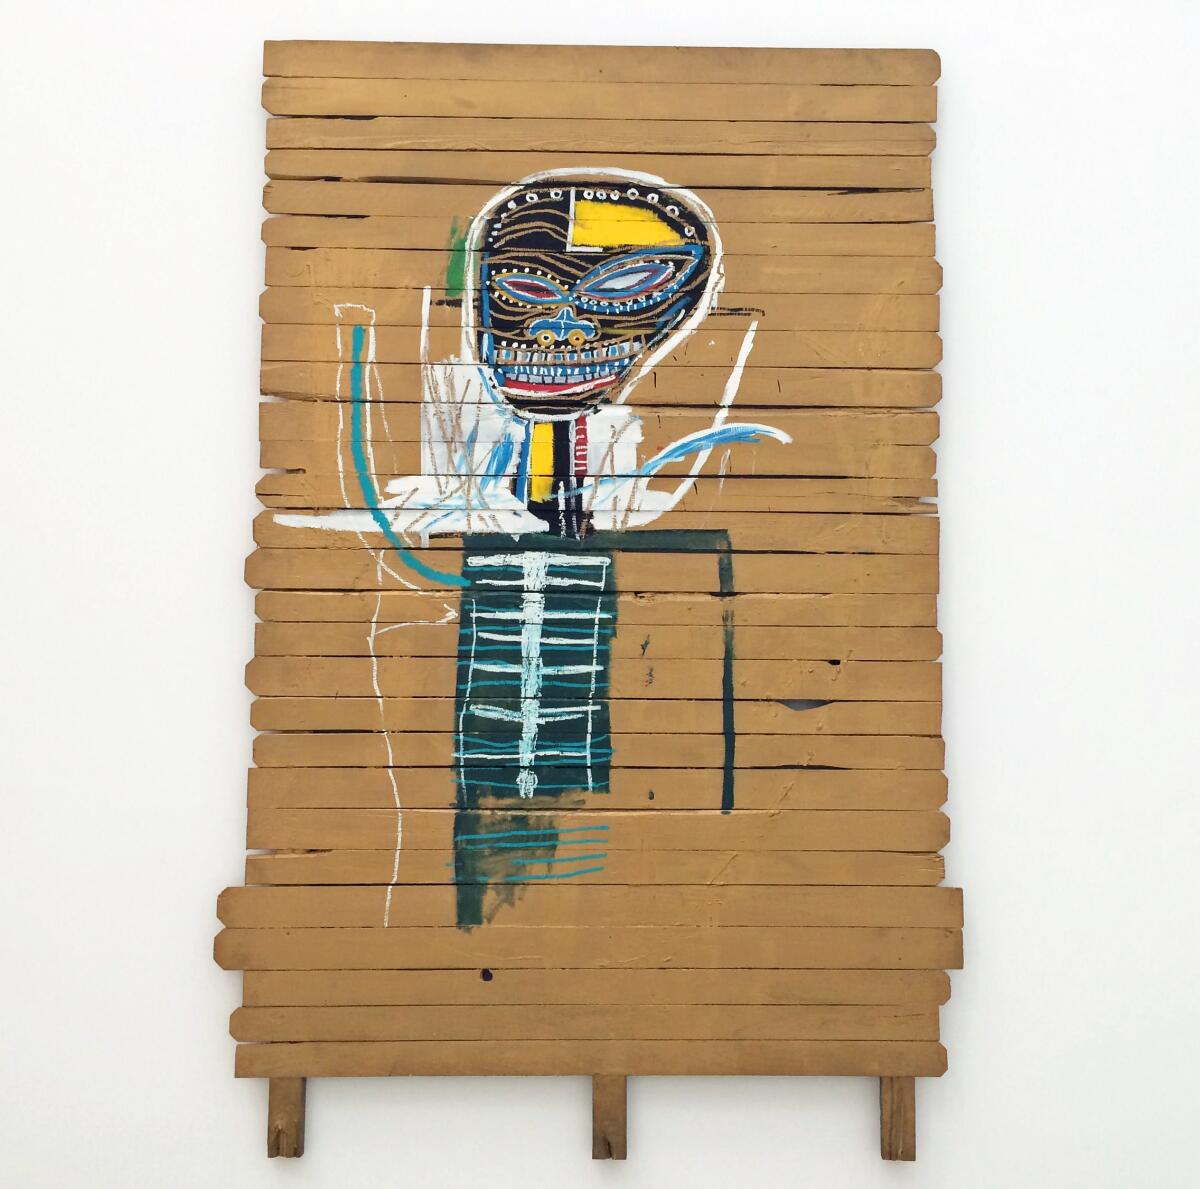 A painting by Jean-Michel Basquiat shows a black, skeletal figure on wooden planks painted a golden color